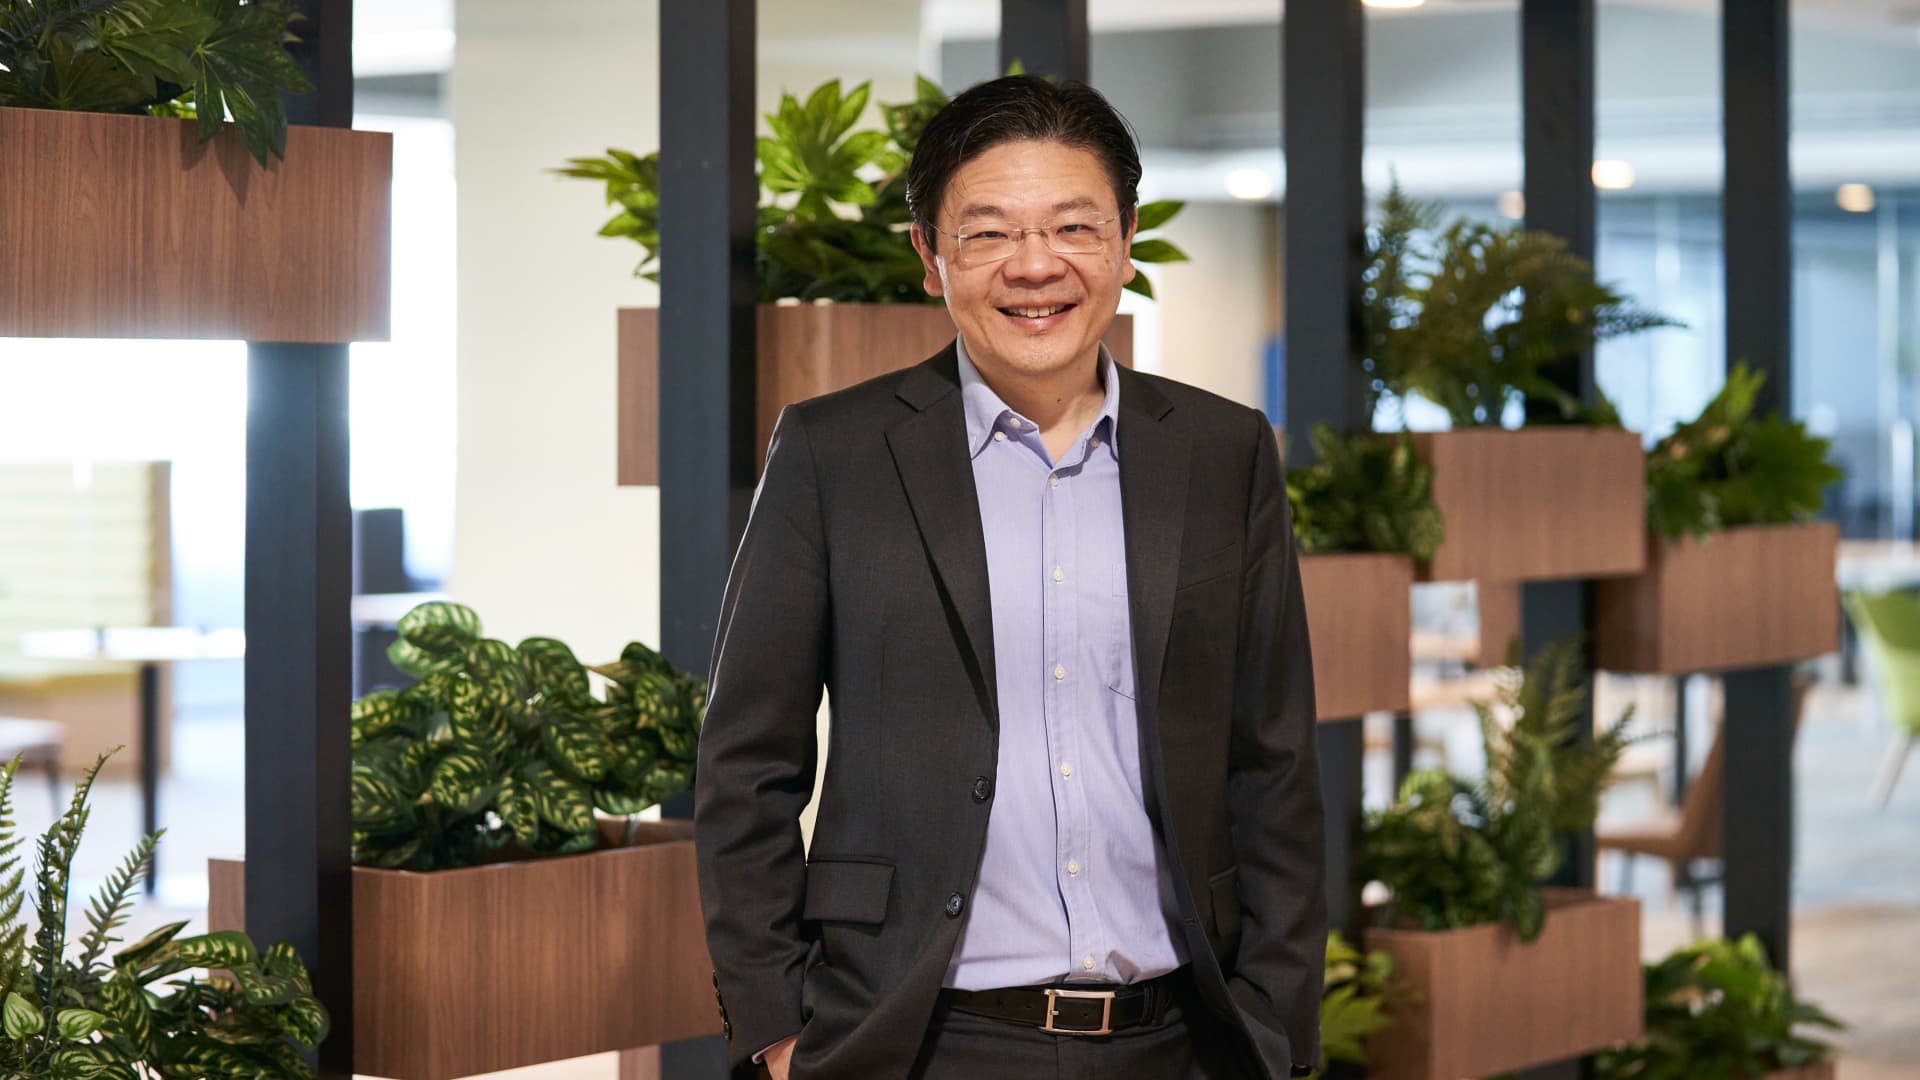 Singapore names Lawrence Wong as chairman of MAS central bank